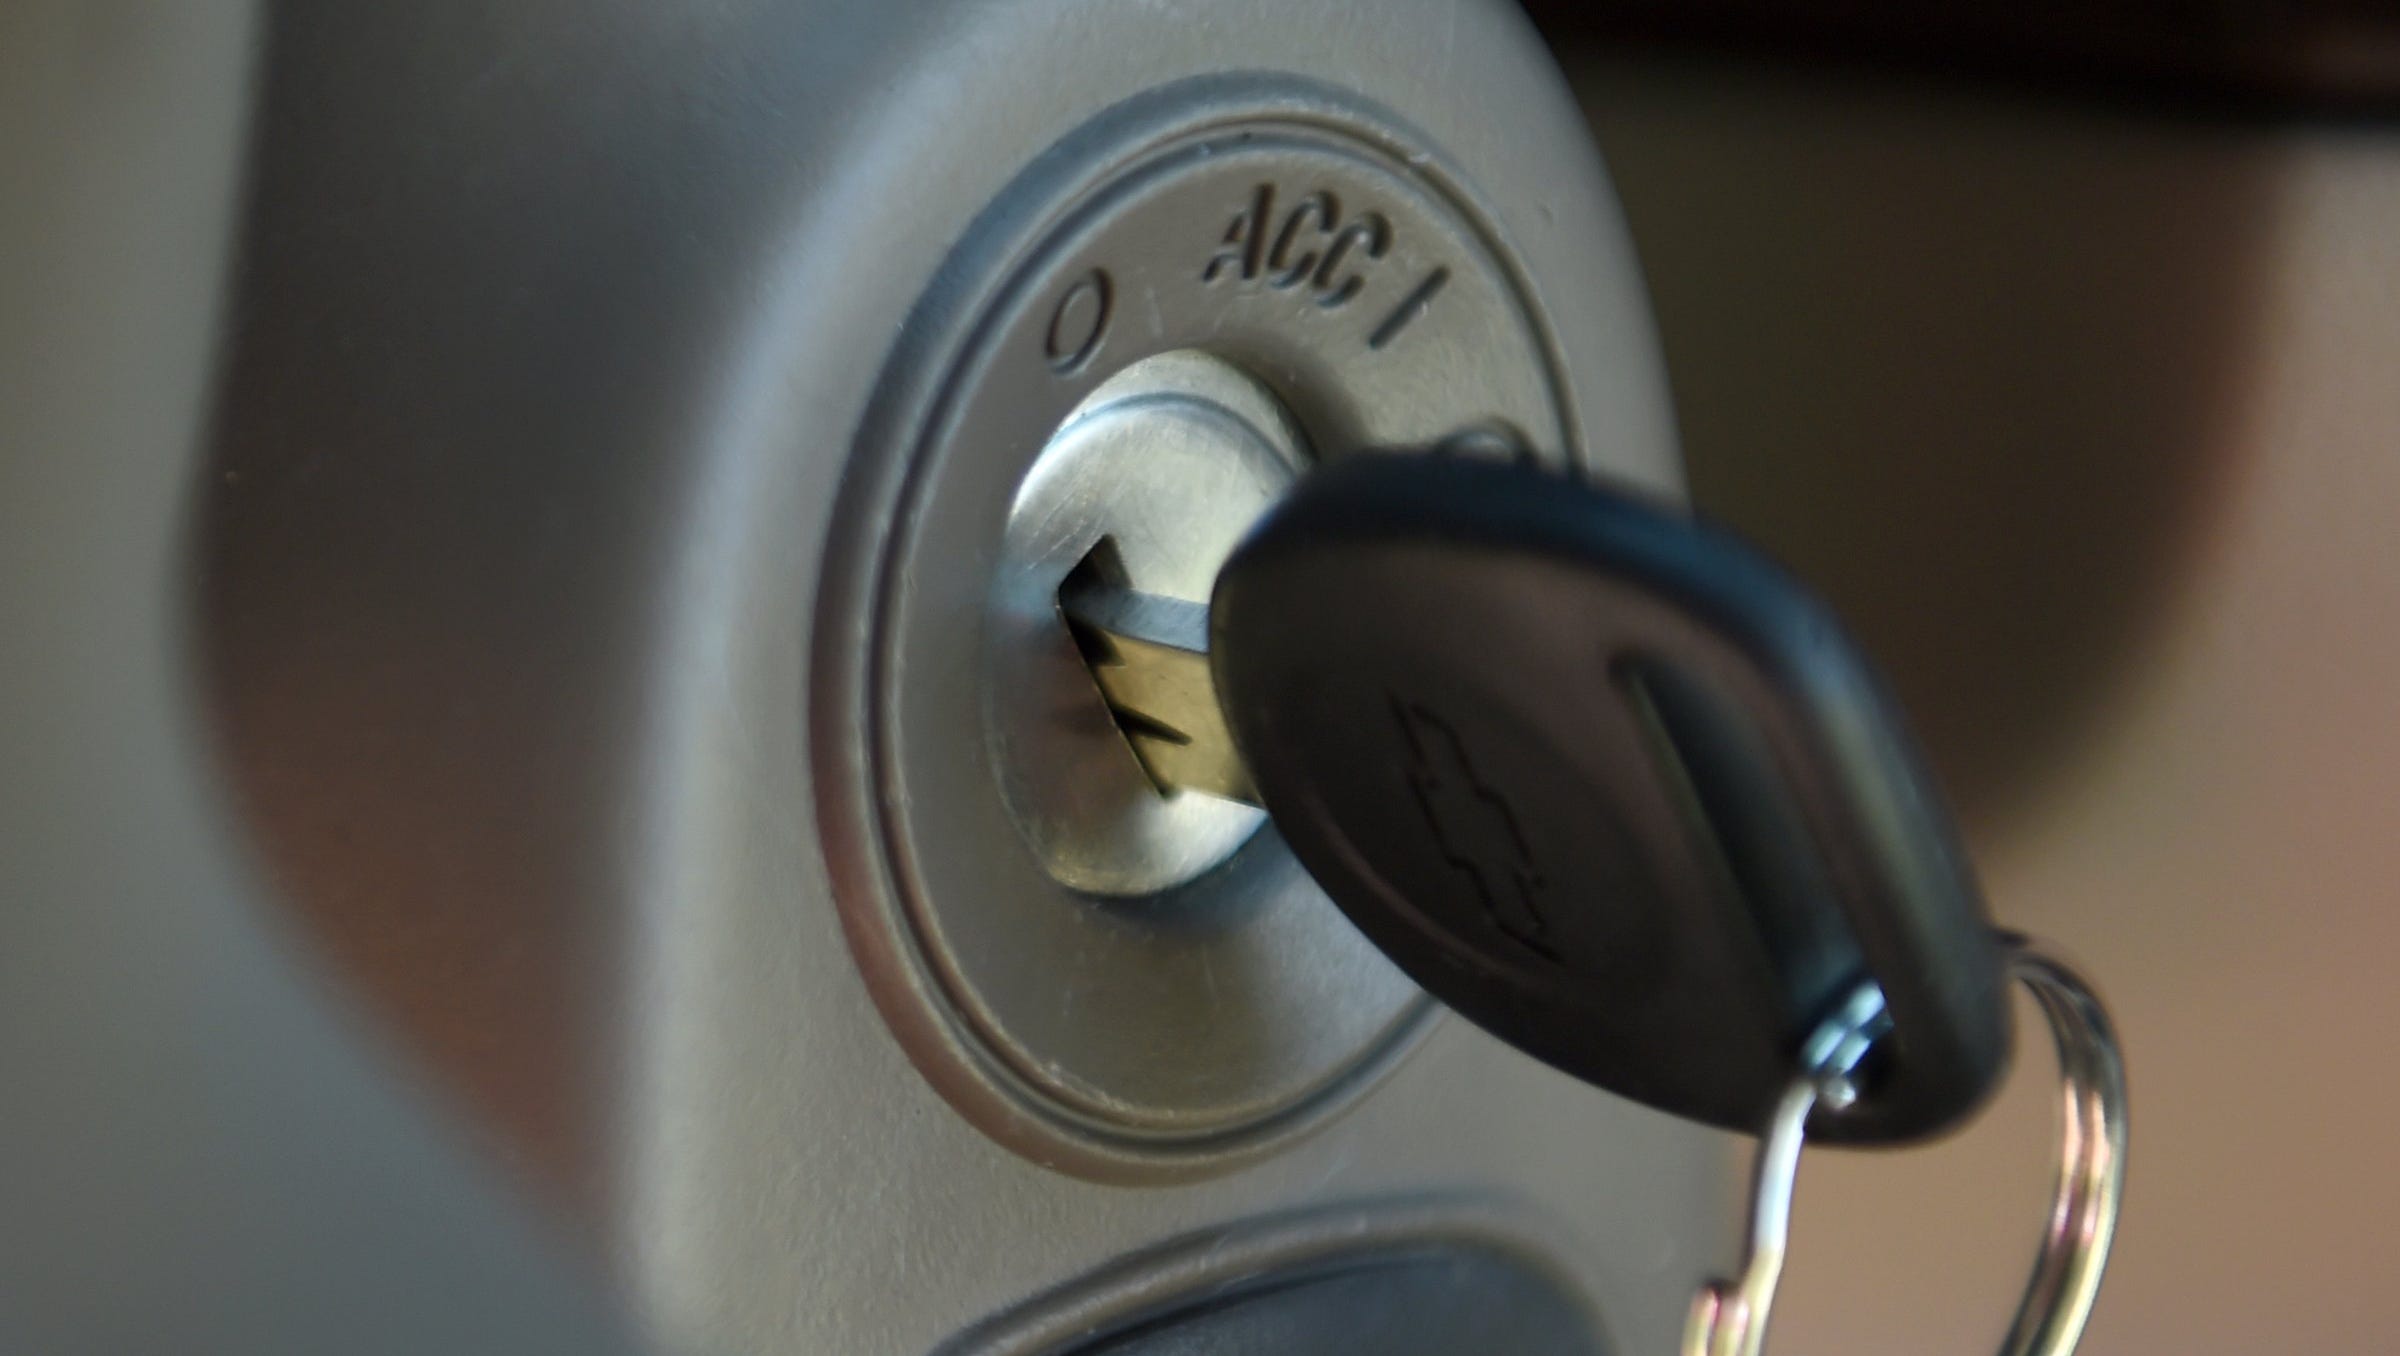 GM to pay $120 million to settle ignition switch case